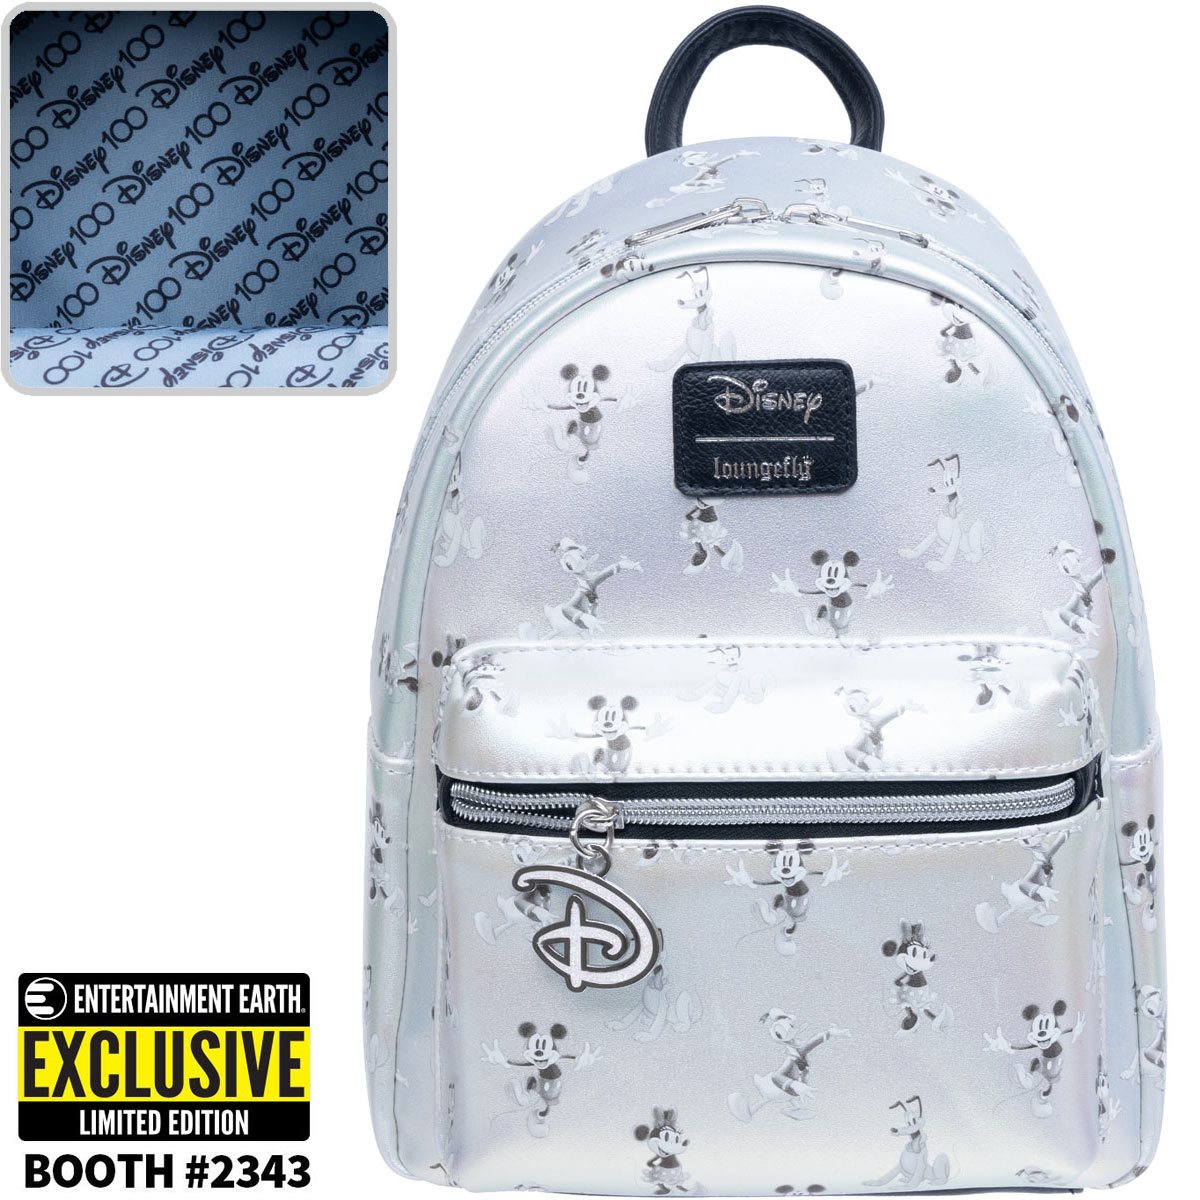 Loungefly Disney DCL WISH Cruise ship Mini Backpack